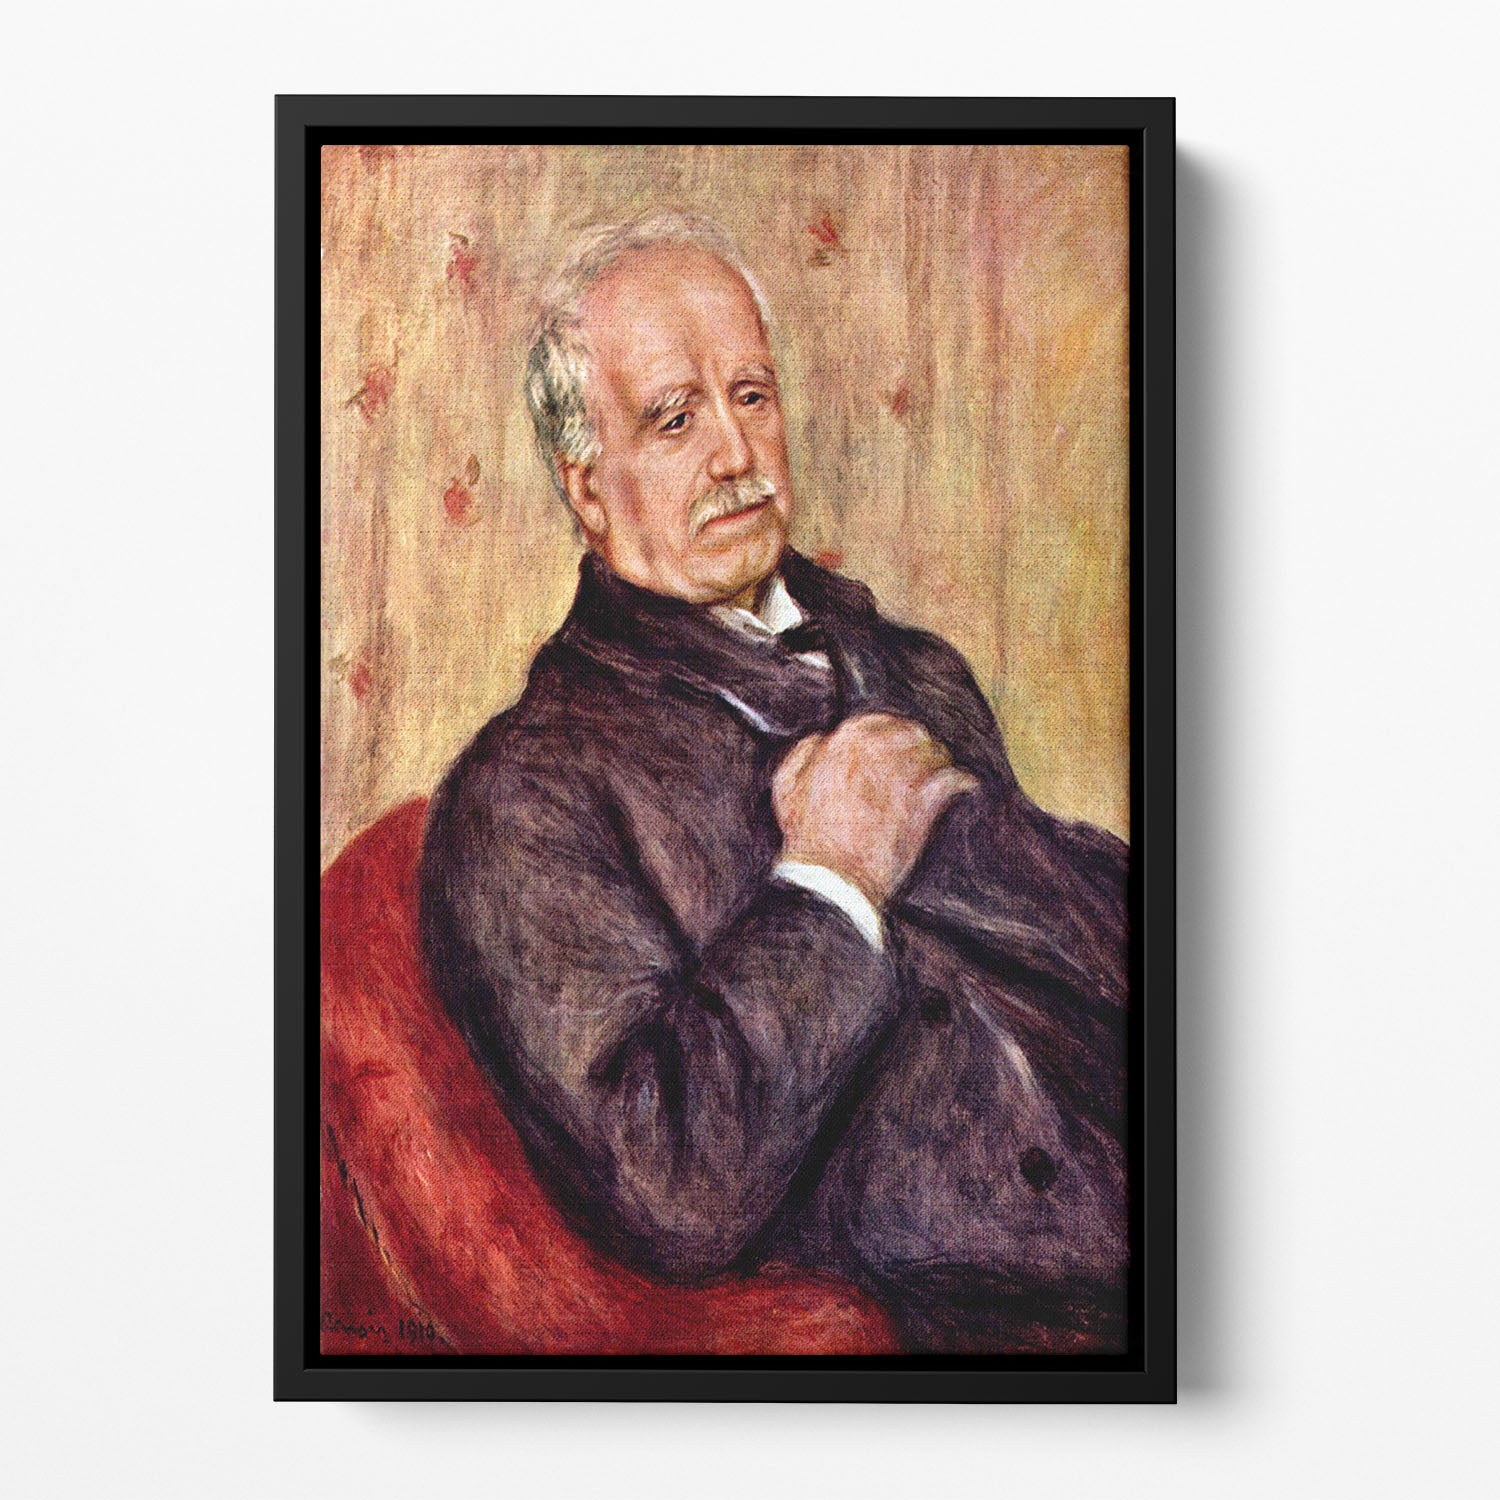 Portrait of Paul Durand Ruel by Renoir Floating Framed Canvas